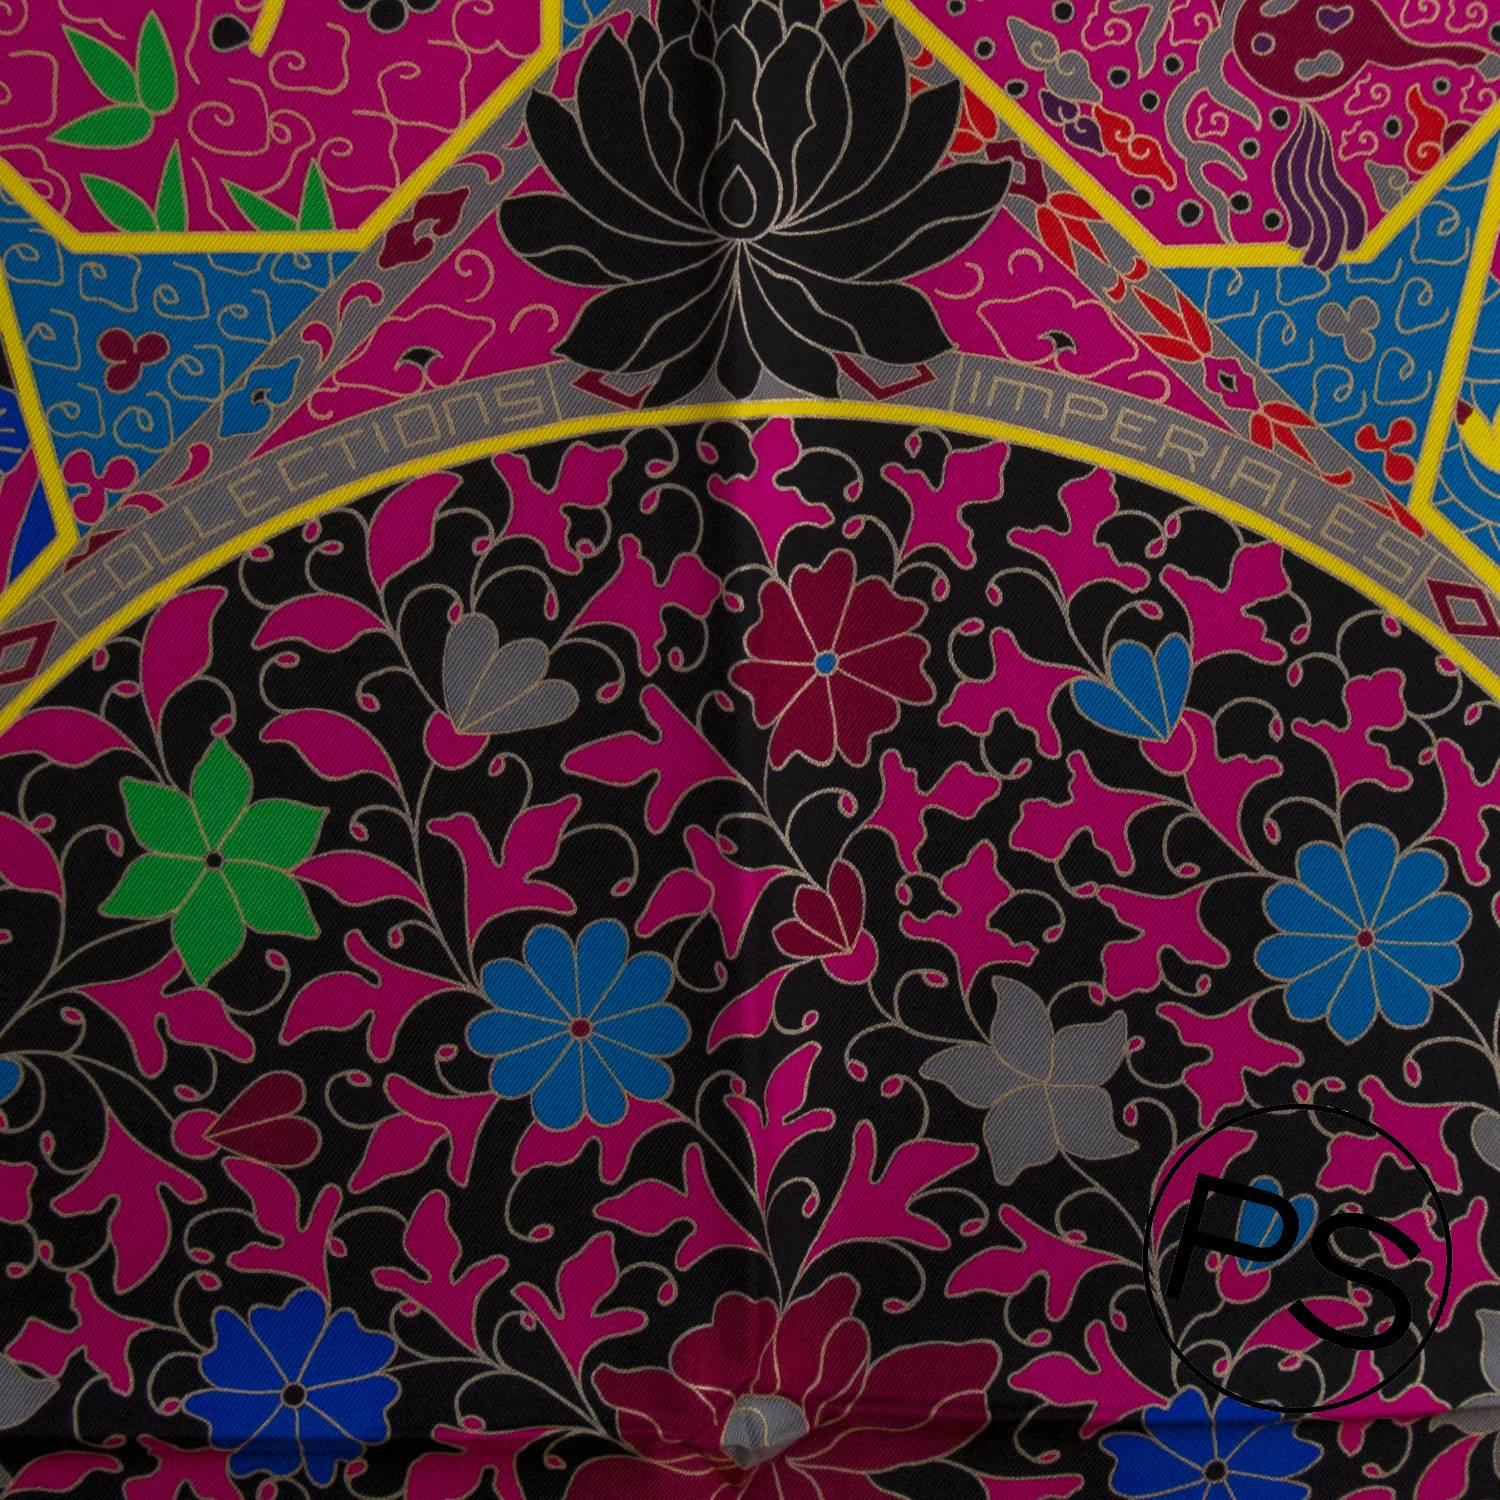 Hermes Carre Twill Collections Imperiales Fucshia, Green, Black 2015.

Pre-owned and never used.

Bought it in Hermes store in 2015.

Model; L'arbre du vent

Composition; 100% Silk.

Size; 90cm x 90cm.

Color;FUCHSIA/VERT/NOIR

